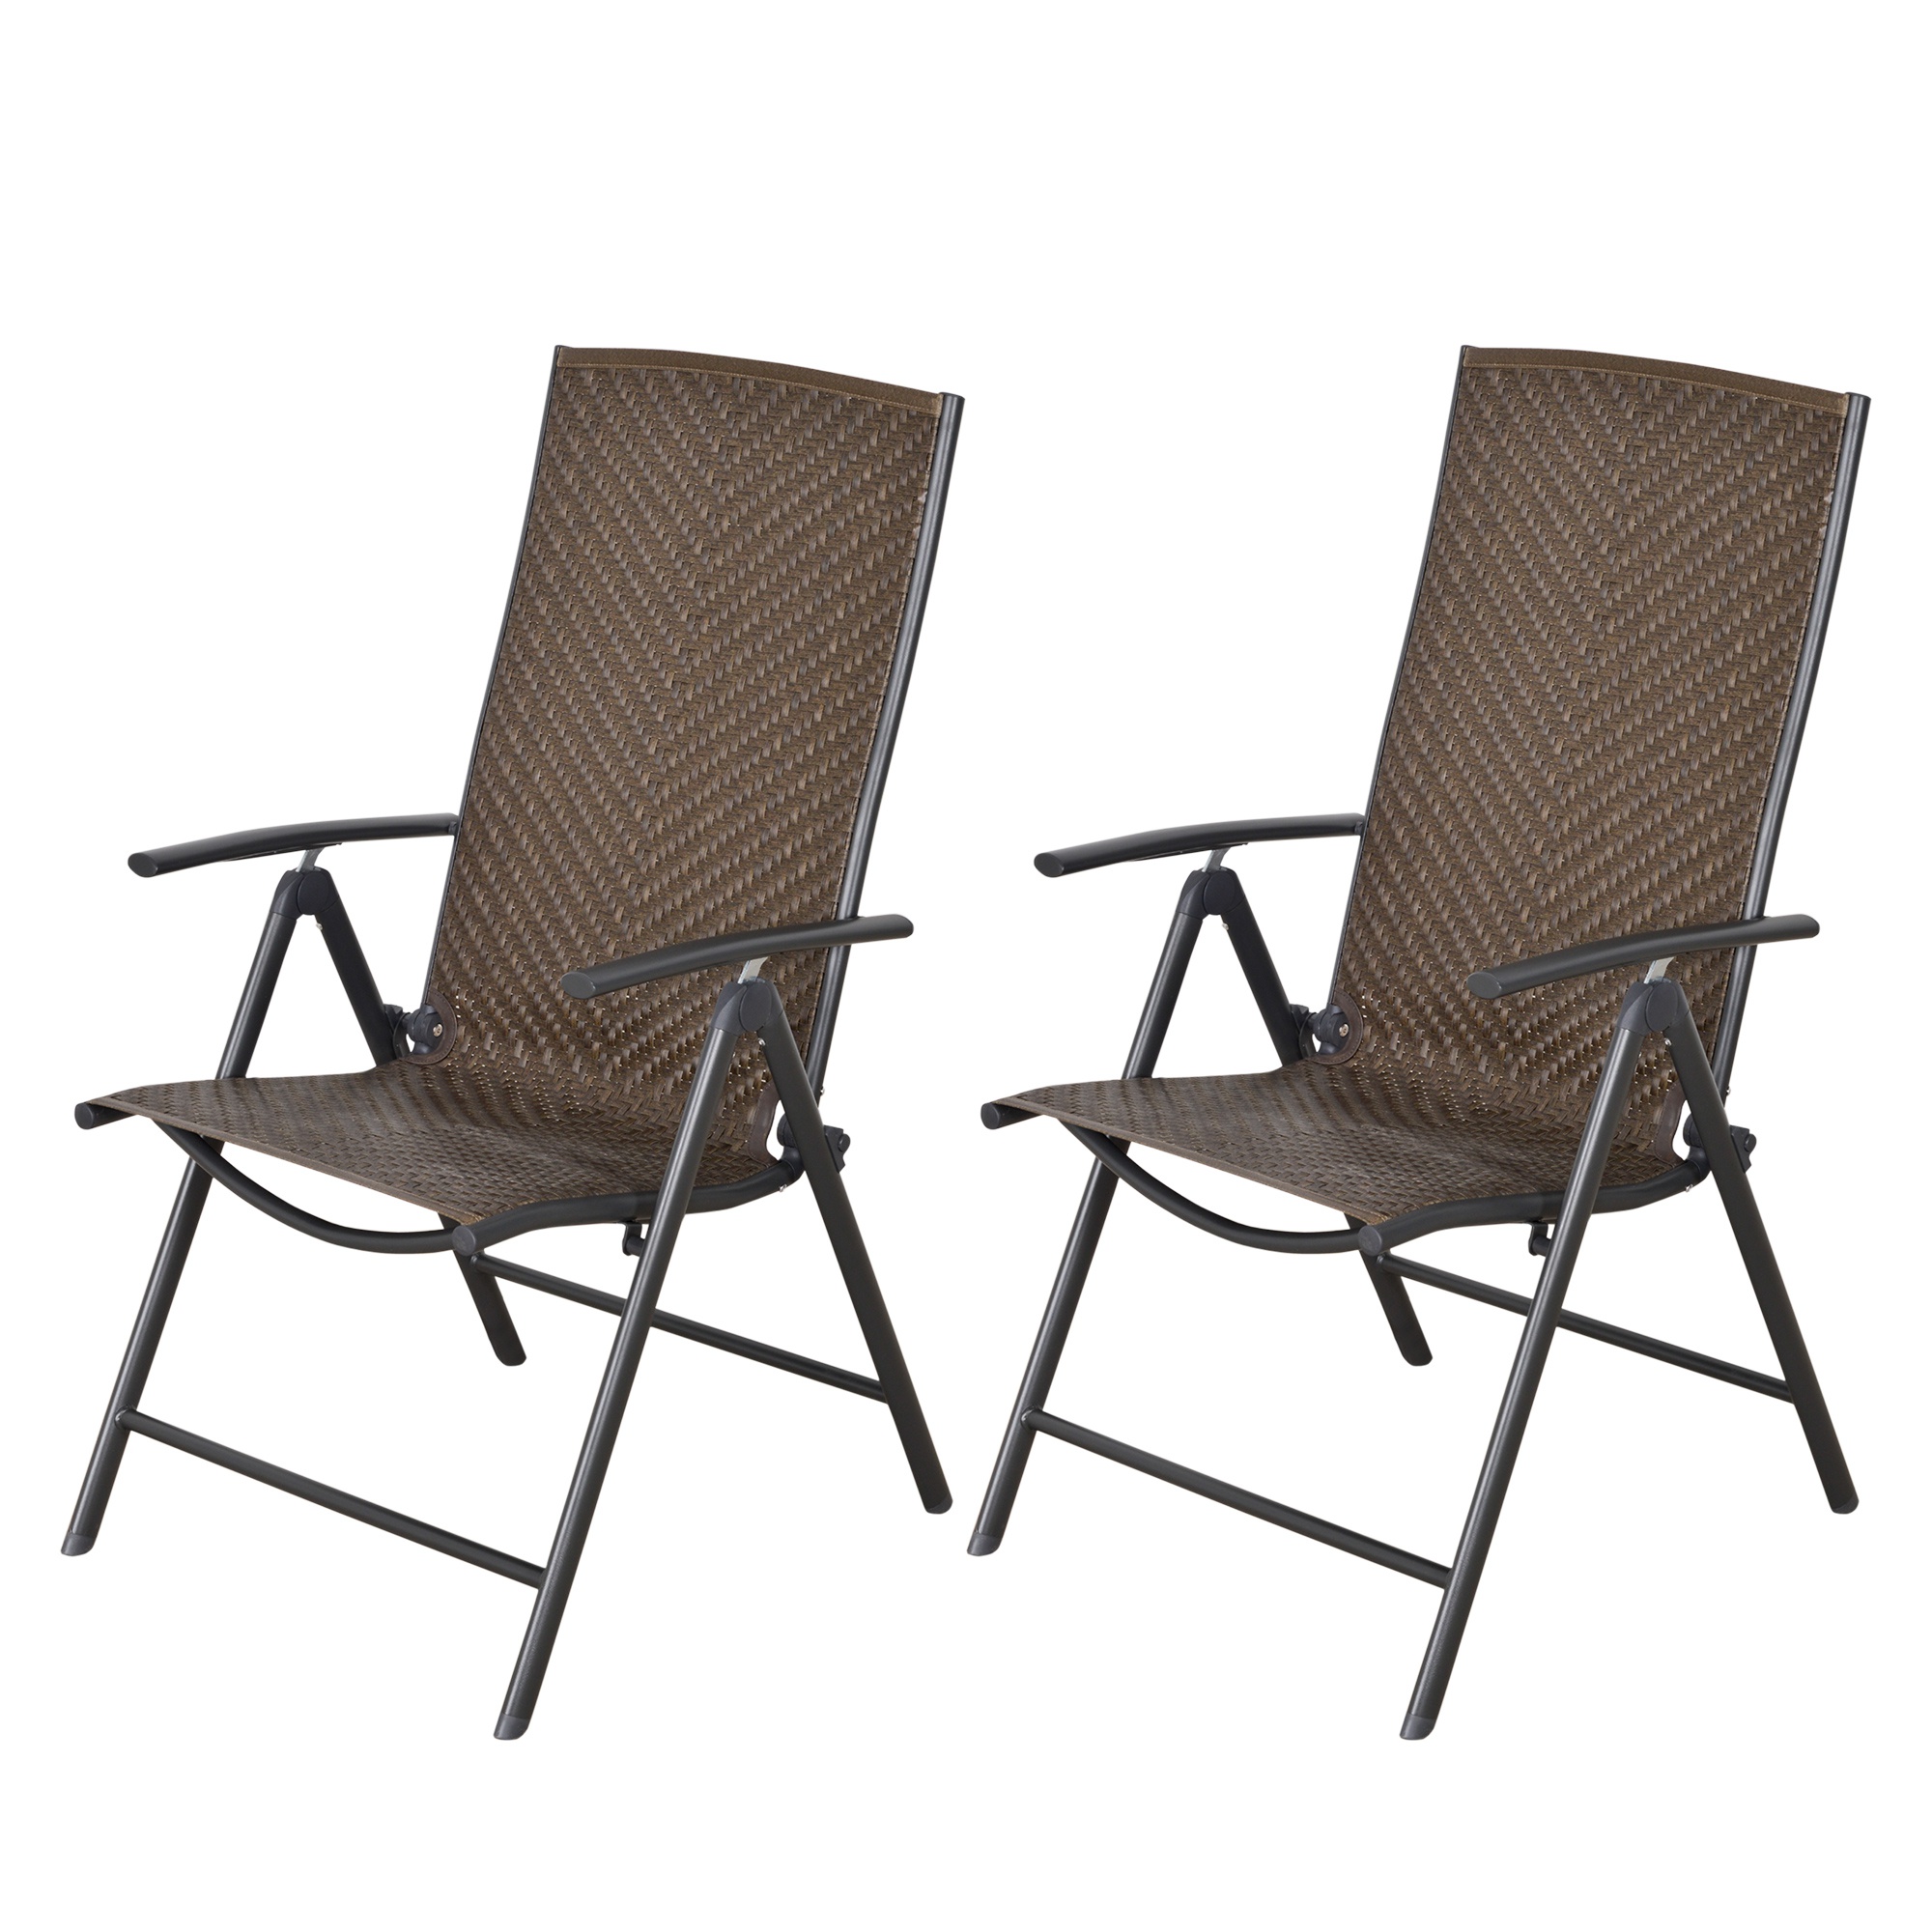 2-Piece PE Rattan Wicker Patio Recliner Set with Folding Design, Quality Steel Frame & All-Weather Build, Grey